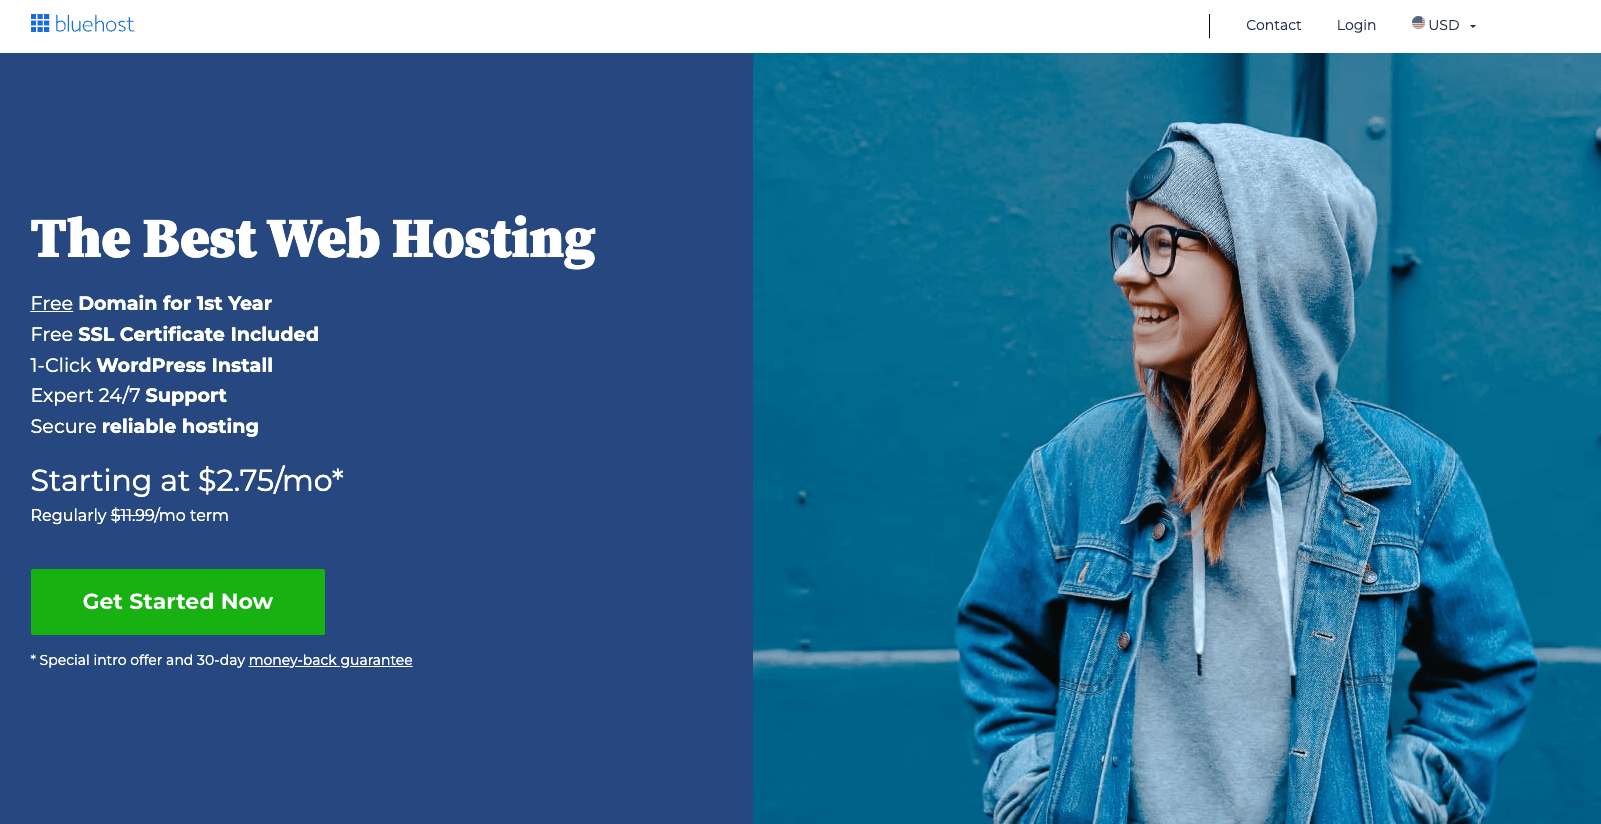 One of our picks for best affordable shared WordPress hosting is Bluehost.